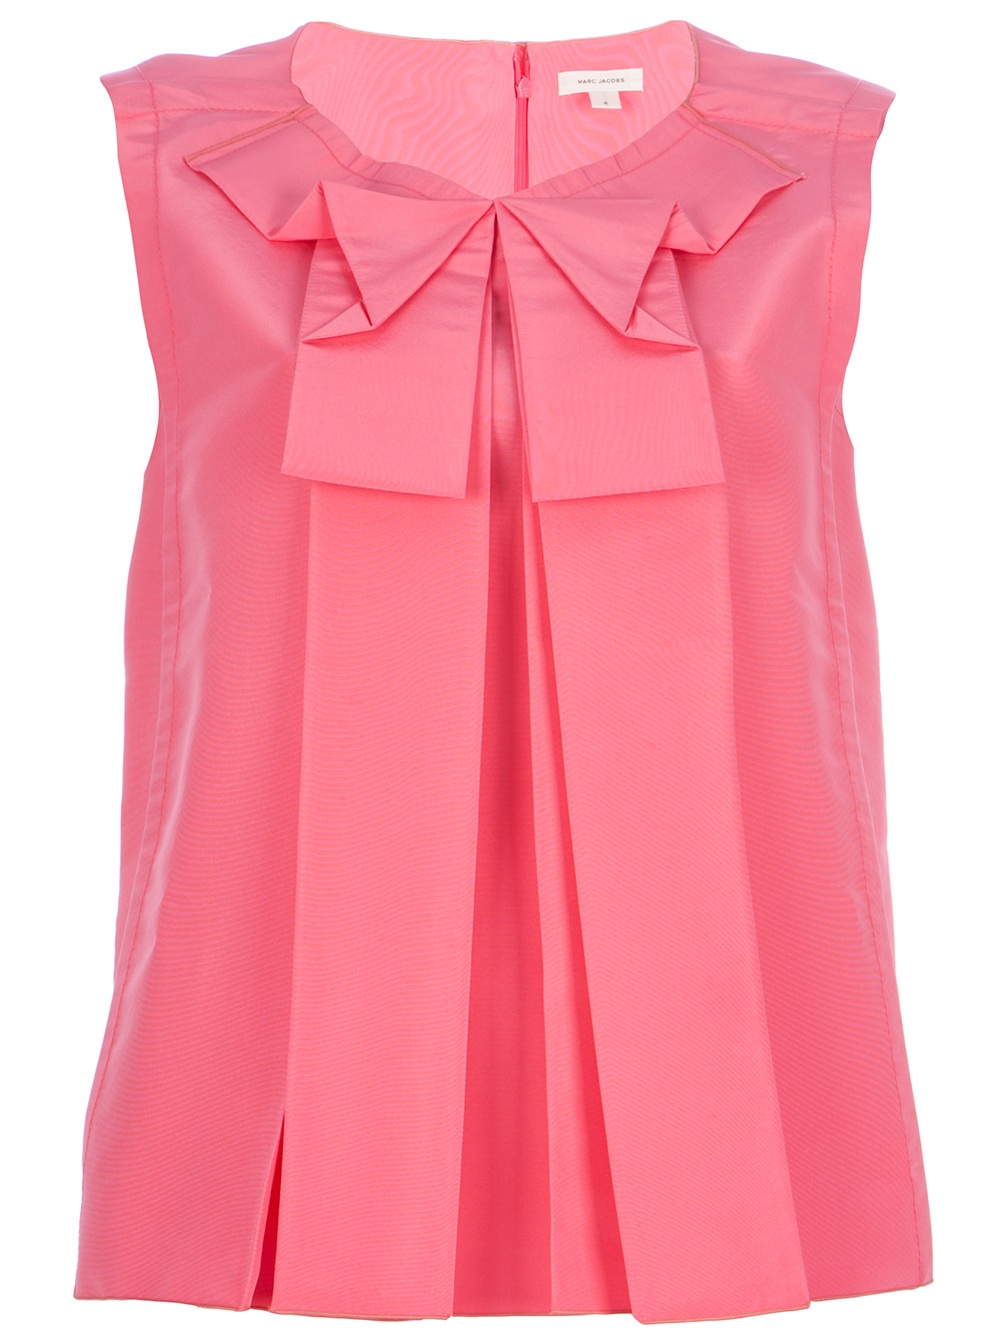 Marc Jacobs Sleeveless Pleat Top in Pink | Lyst